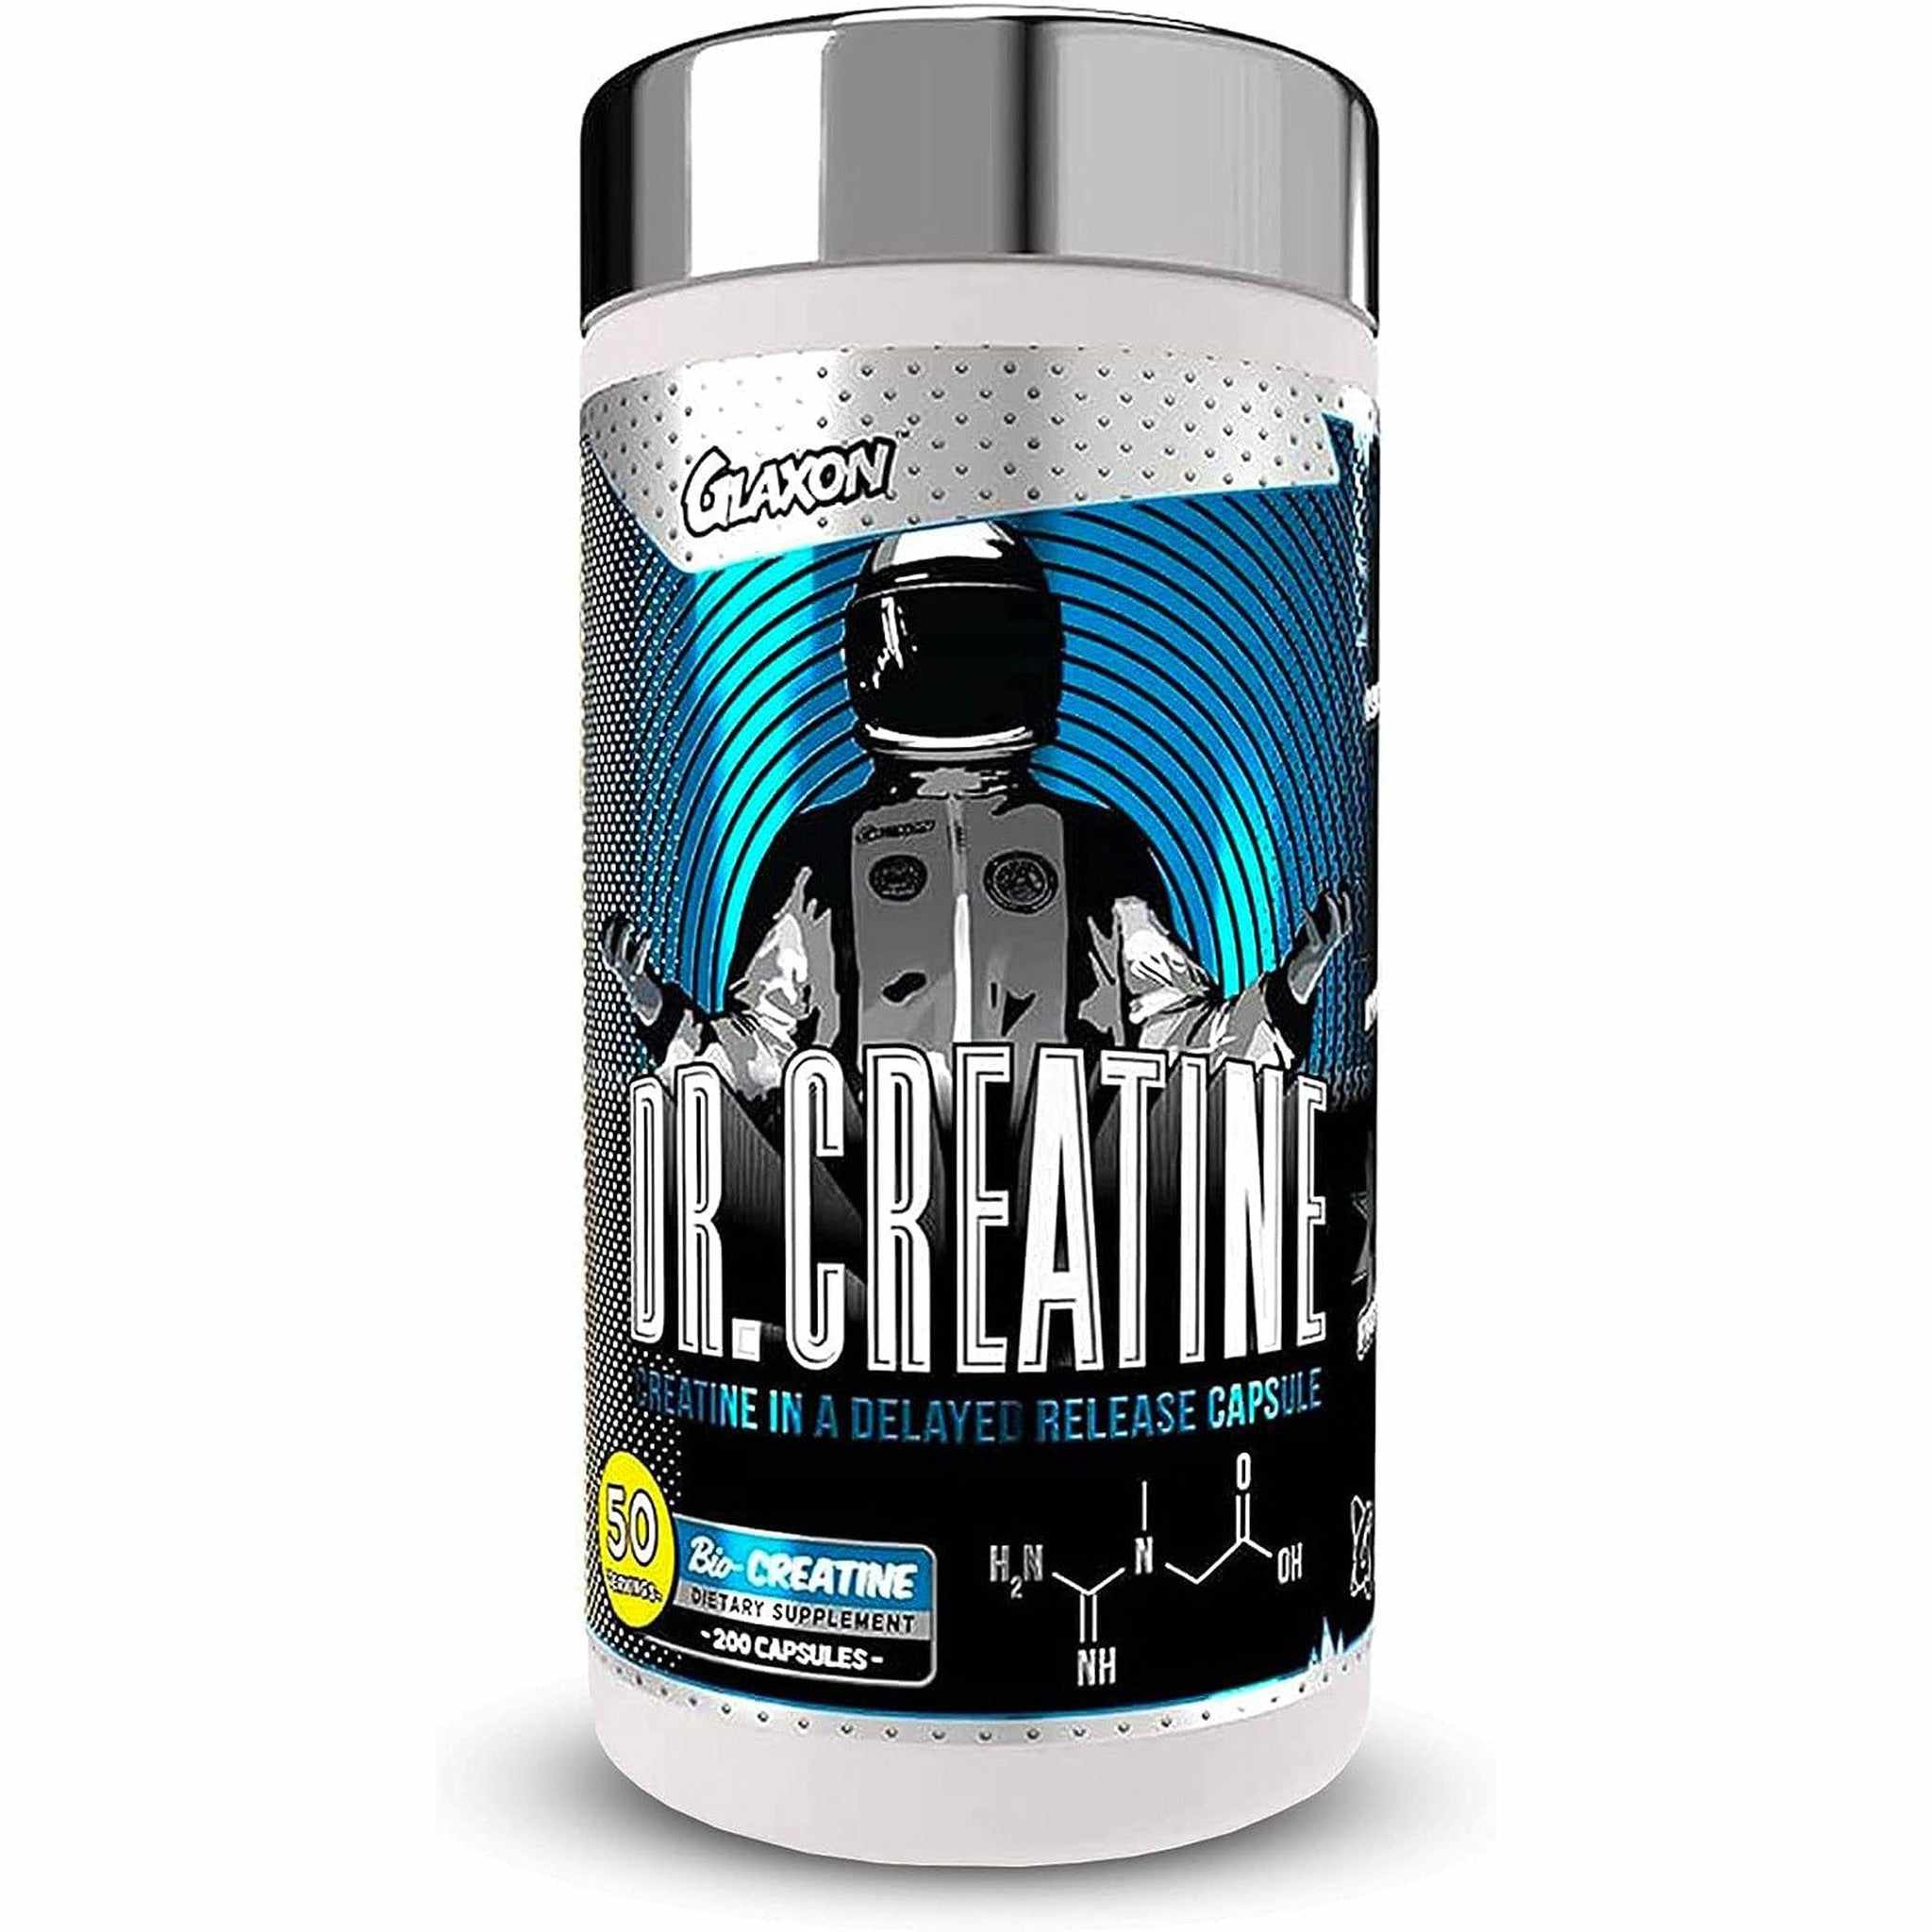 Glaxon Dr. Creatine, 200 Capsules - Ultimate Sport Nutrition